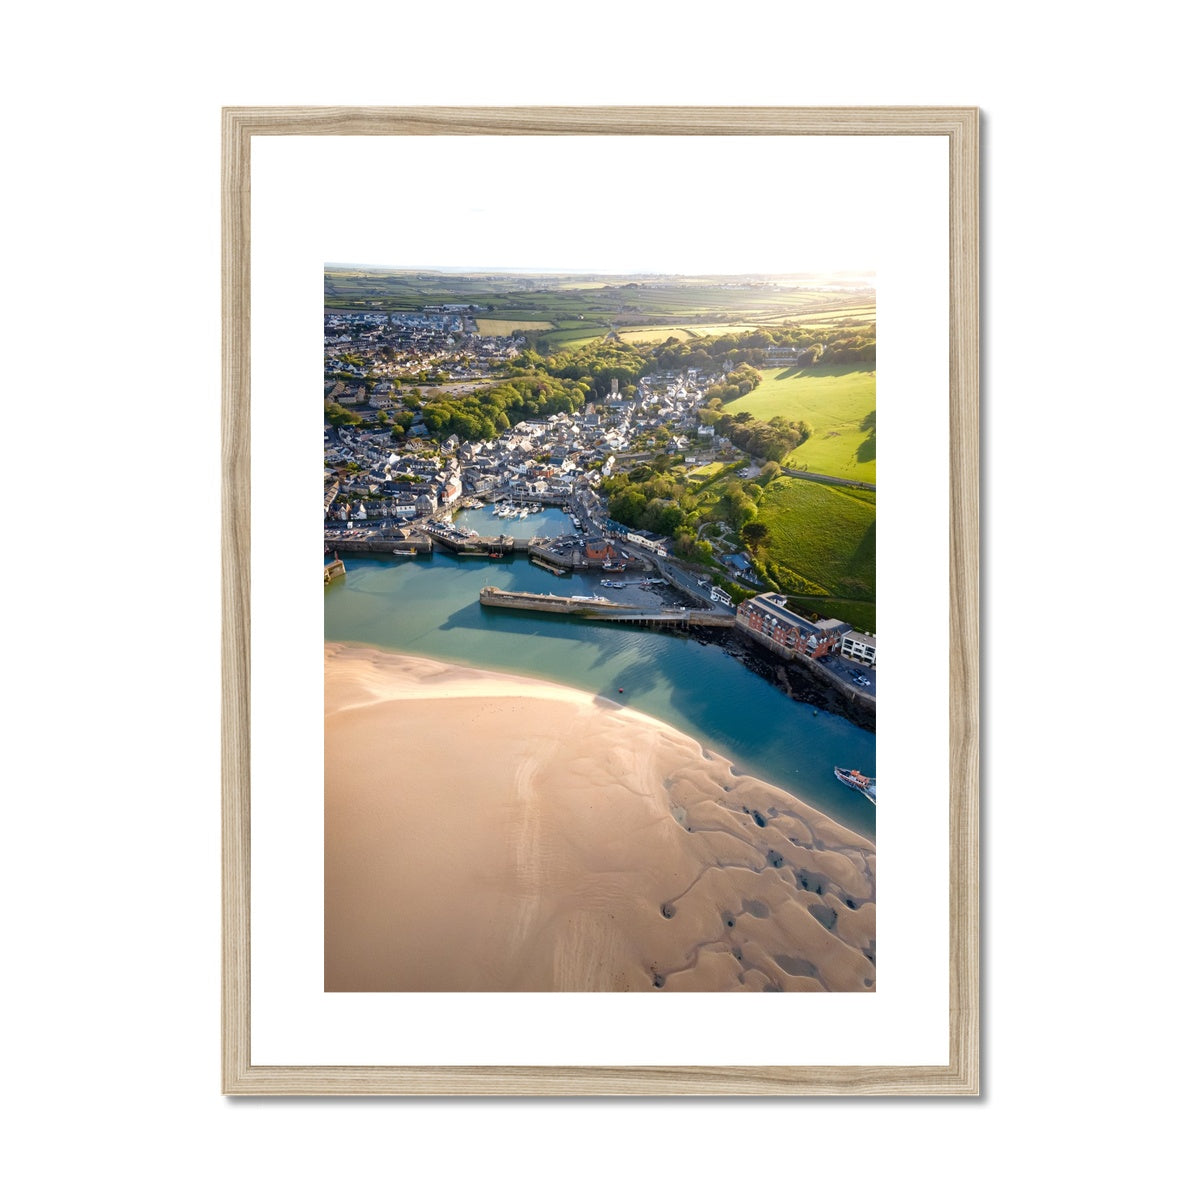 padstow wooden frame